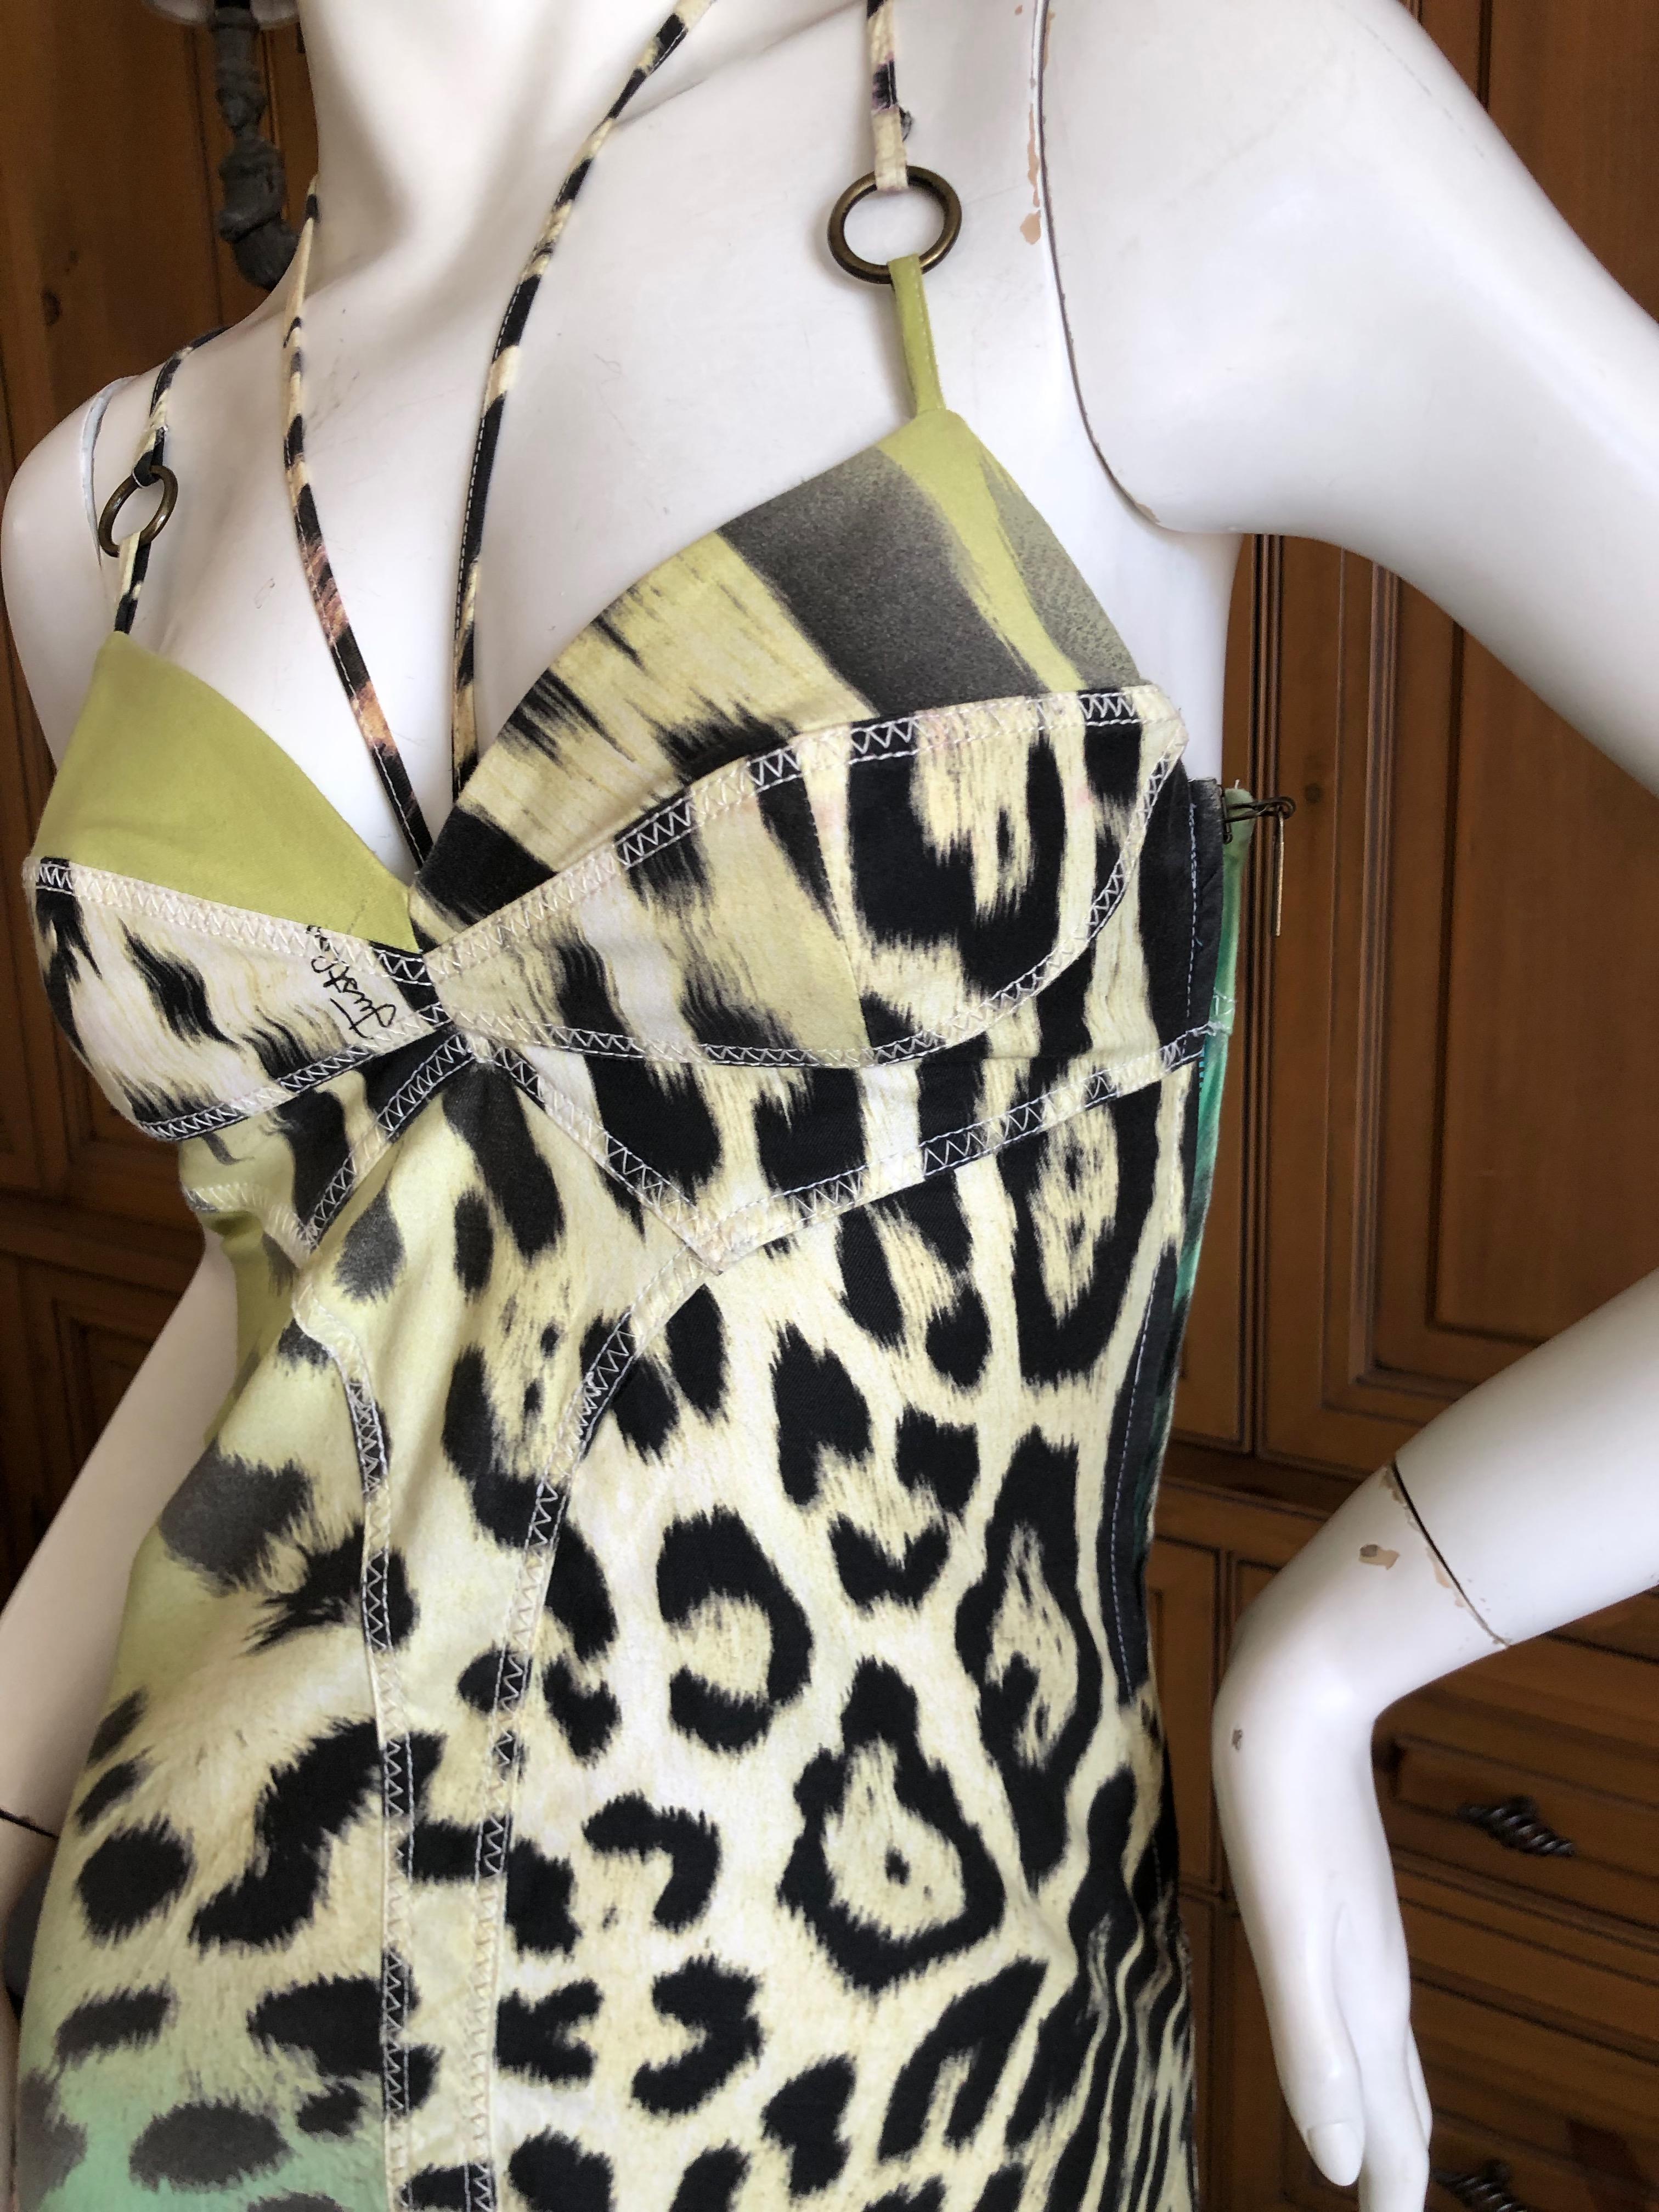 Roberto Cavalli for Just Cavalli Leopard Pattern Dress w Bronze Ring Details In Excellent Condition For Sale In Cloverdale, CA